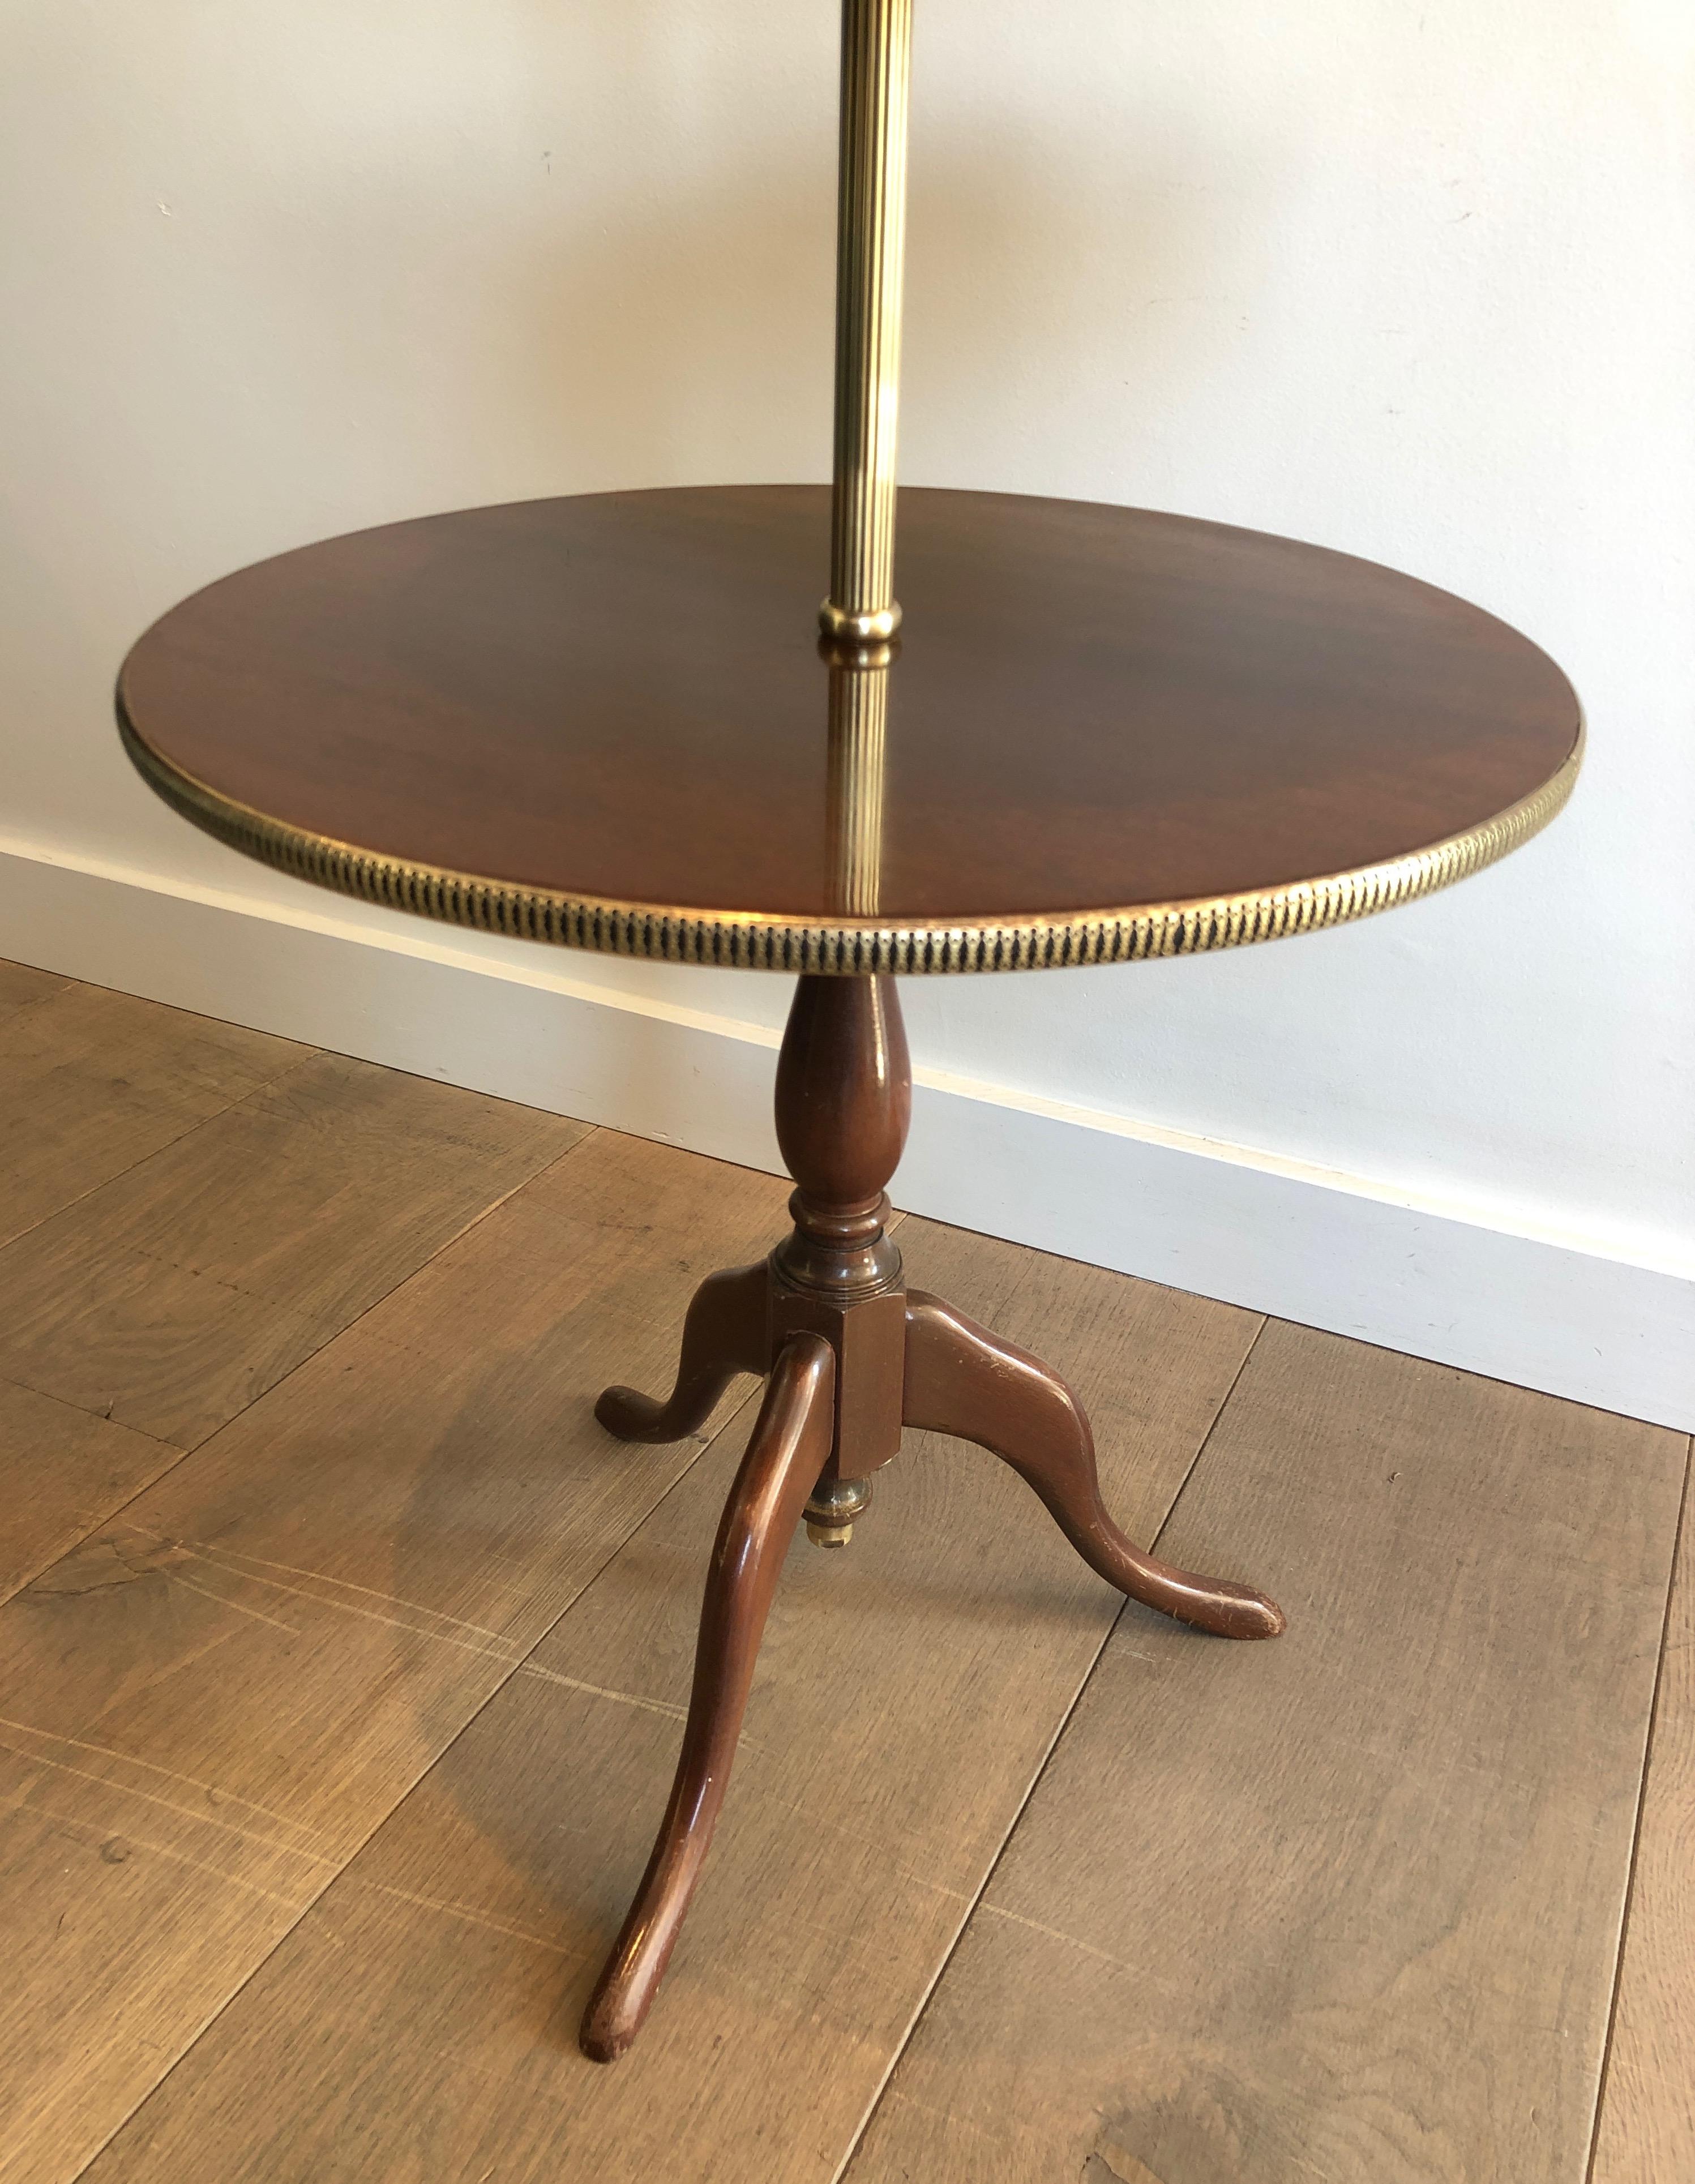 Neoclassical Style 3 Tiers Mahogany and Brass Round Table, French, Circa 1940 For Sale 3